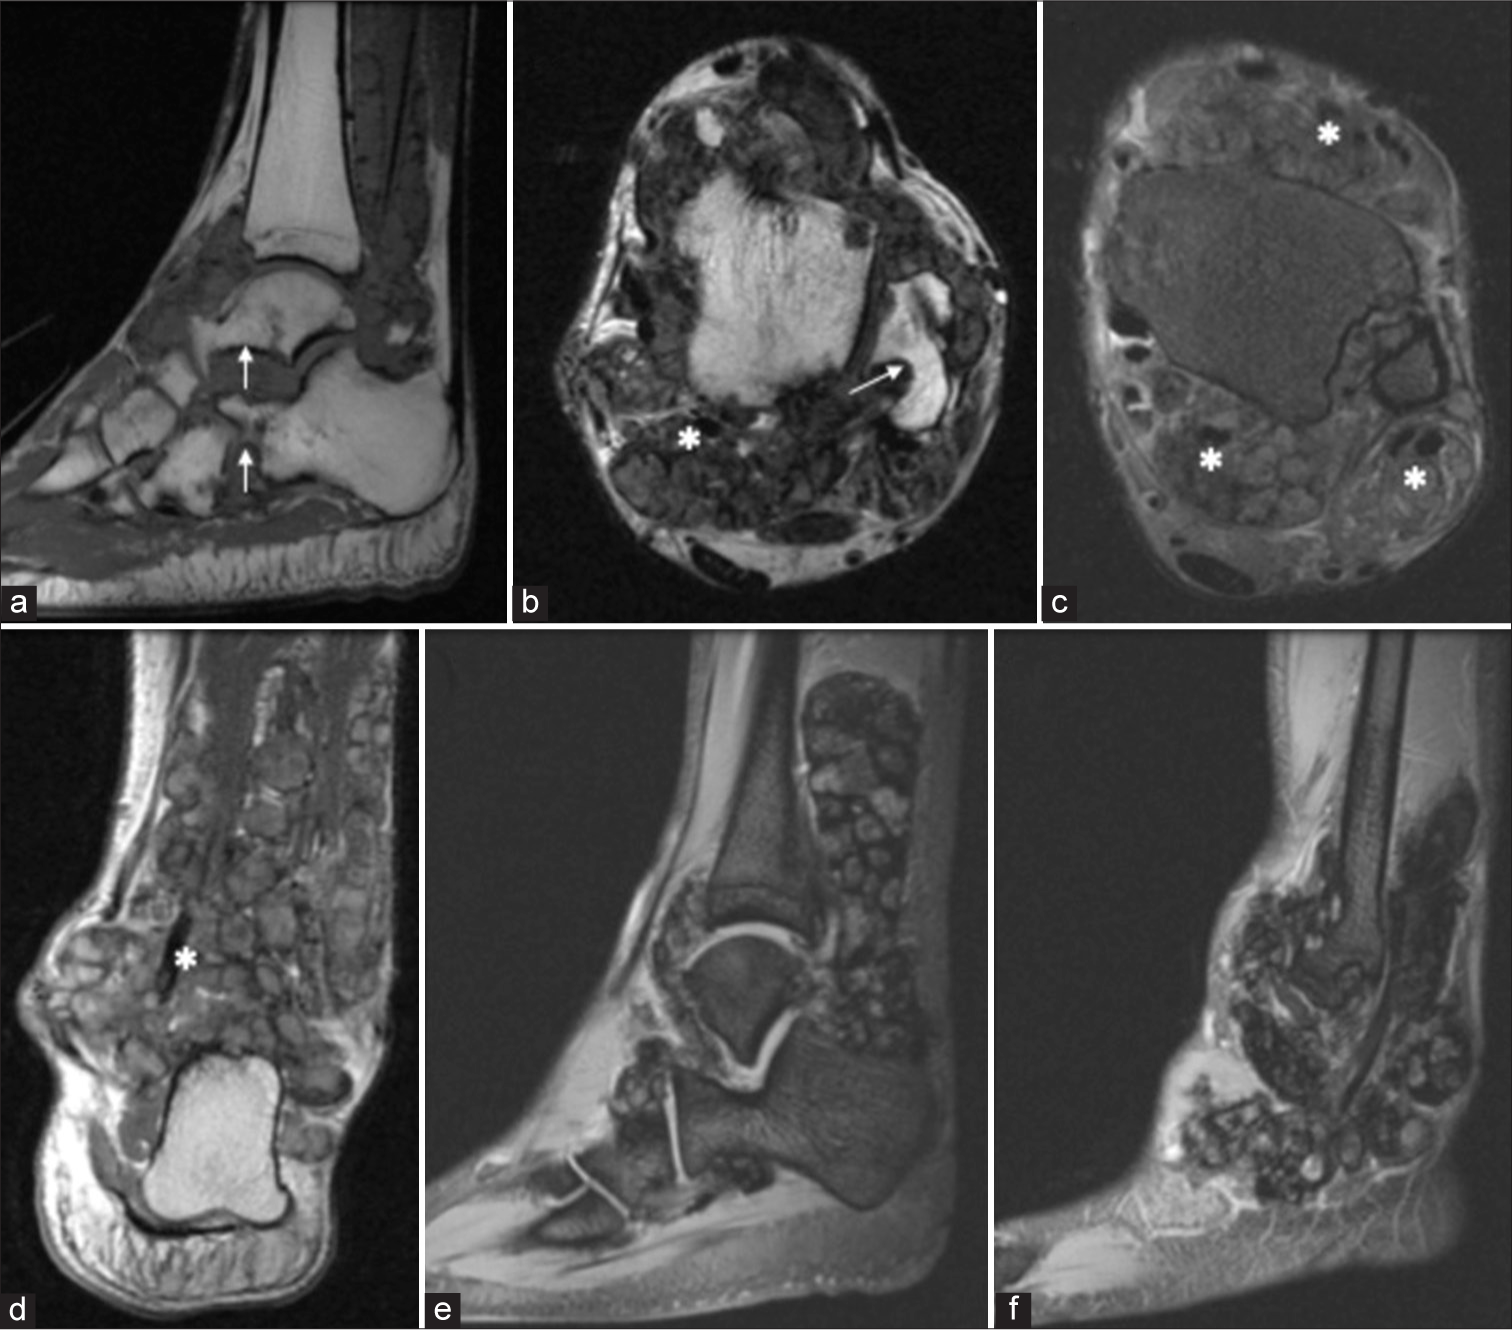 A 28-year-old man with diffuse-type tenosynovial giant cell tumor who presented with progressive left ankle swelling for 2 years. MRI of the left ankle. (a) Sagittal T1-weighted image, (b) Axial T2-weighted image, axial and coronal proton density (PD)-weighted image (c and d) showing an extensive globular mass like synovial proliferation with multiple T1 isointense and T2/PD hypointense nodules along the bursae, recesses, and tendon sheaths causing extrinsic pressure erosions of multiple bones (white arrow) and encasing multiple tendons (asterisk). Gradient recalled echo images (e and f) showing characteristic “blooming artifact” confirming the presence of hemosiderin deposition.